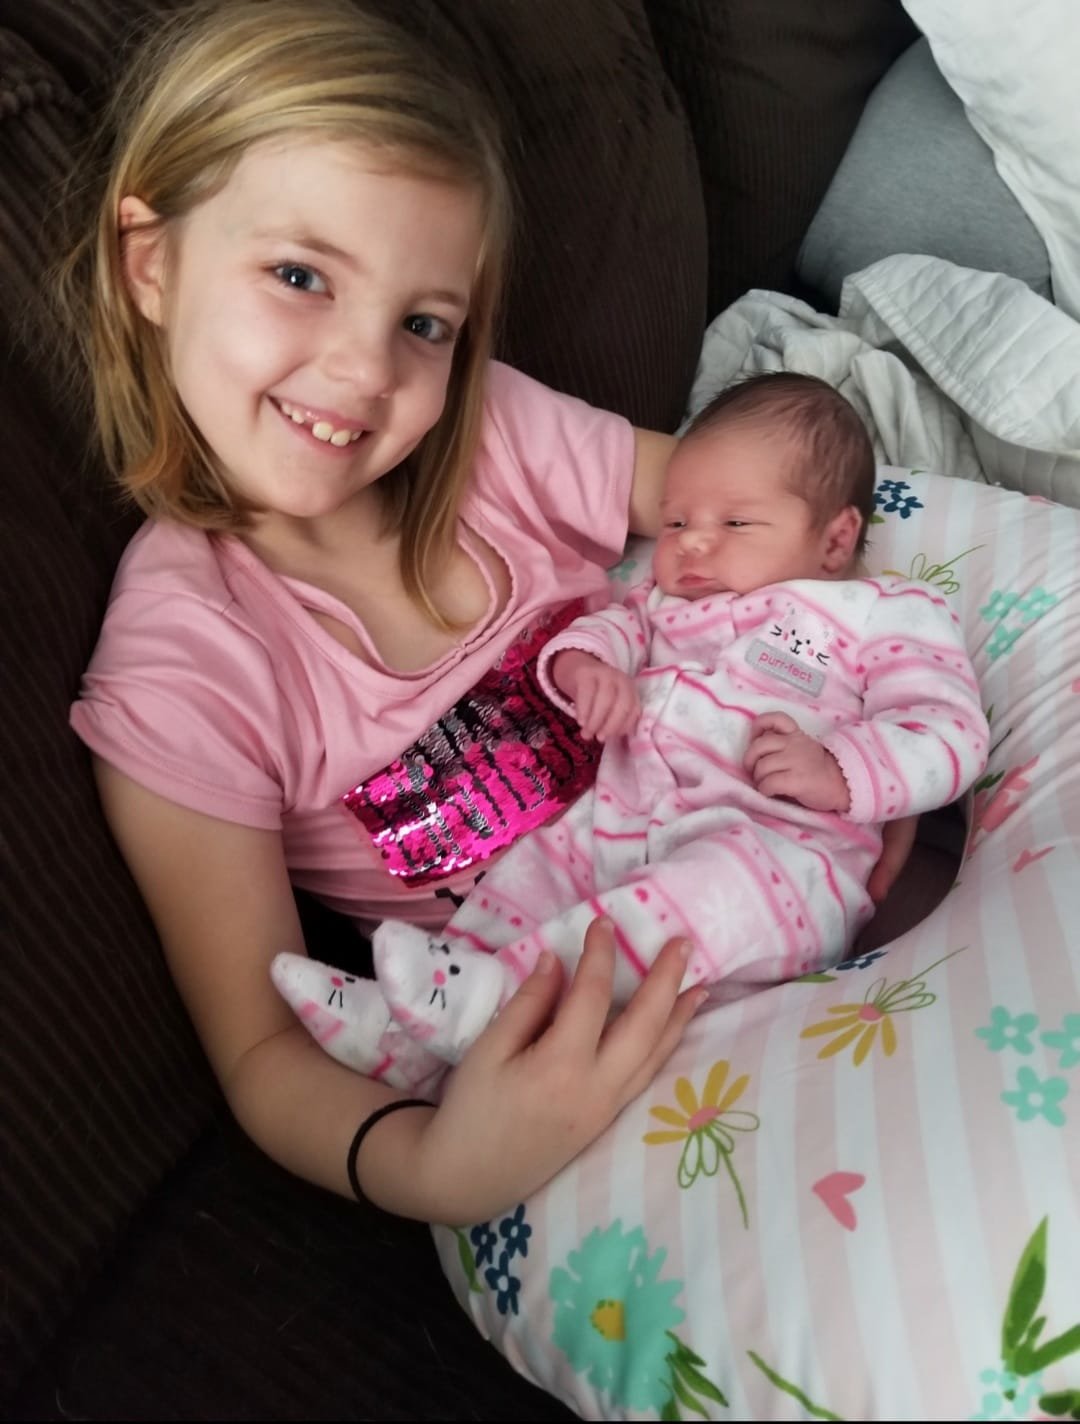 Autumn holds her new baby sister, Delylah. (Photo courtesy of Kelsey Kruse)